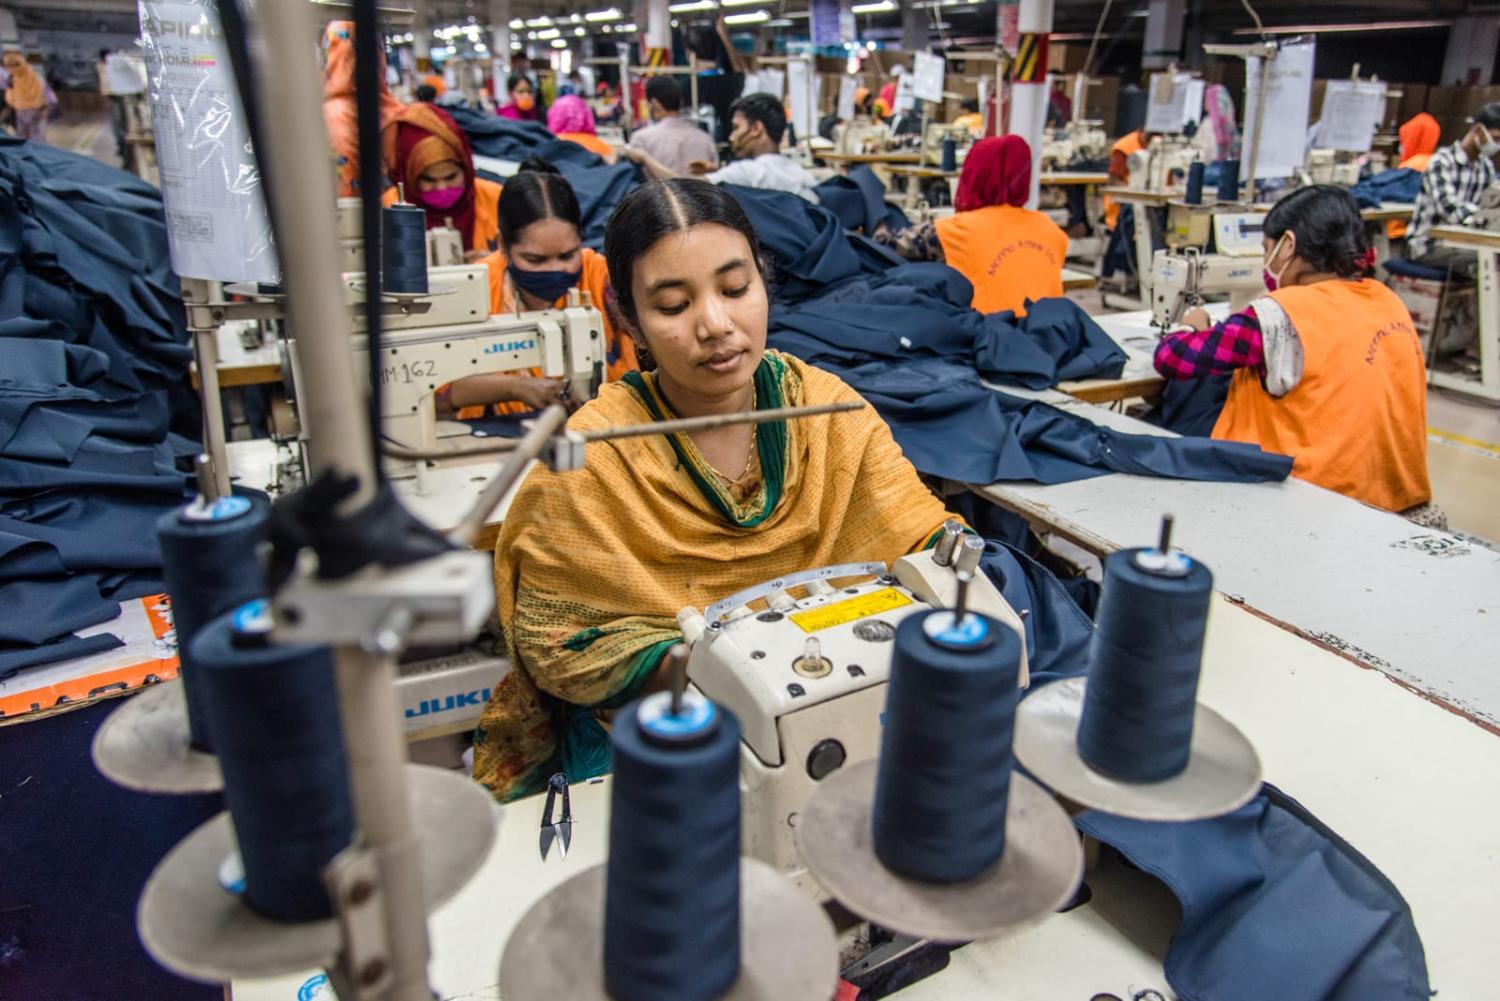 The ready-made garment industry has become a mainstay of the Bangladesh economy (Mustasinur Rahman Alvi via Getty Images)